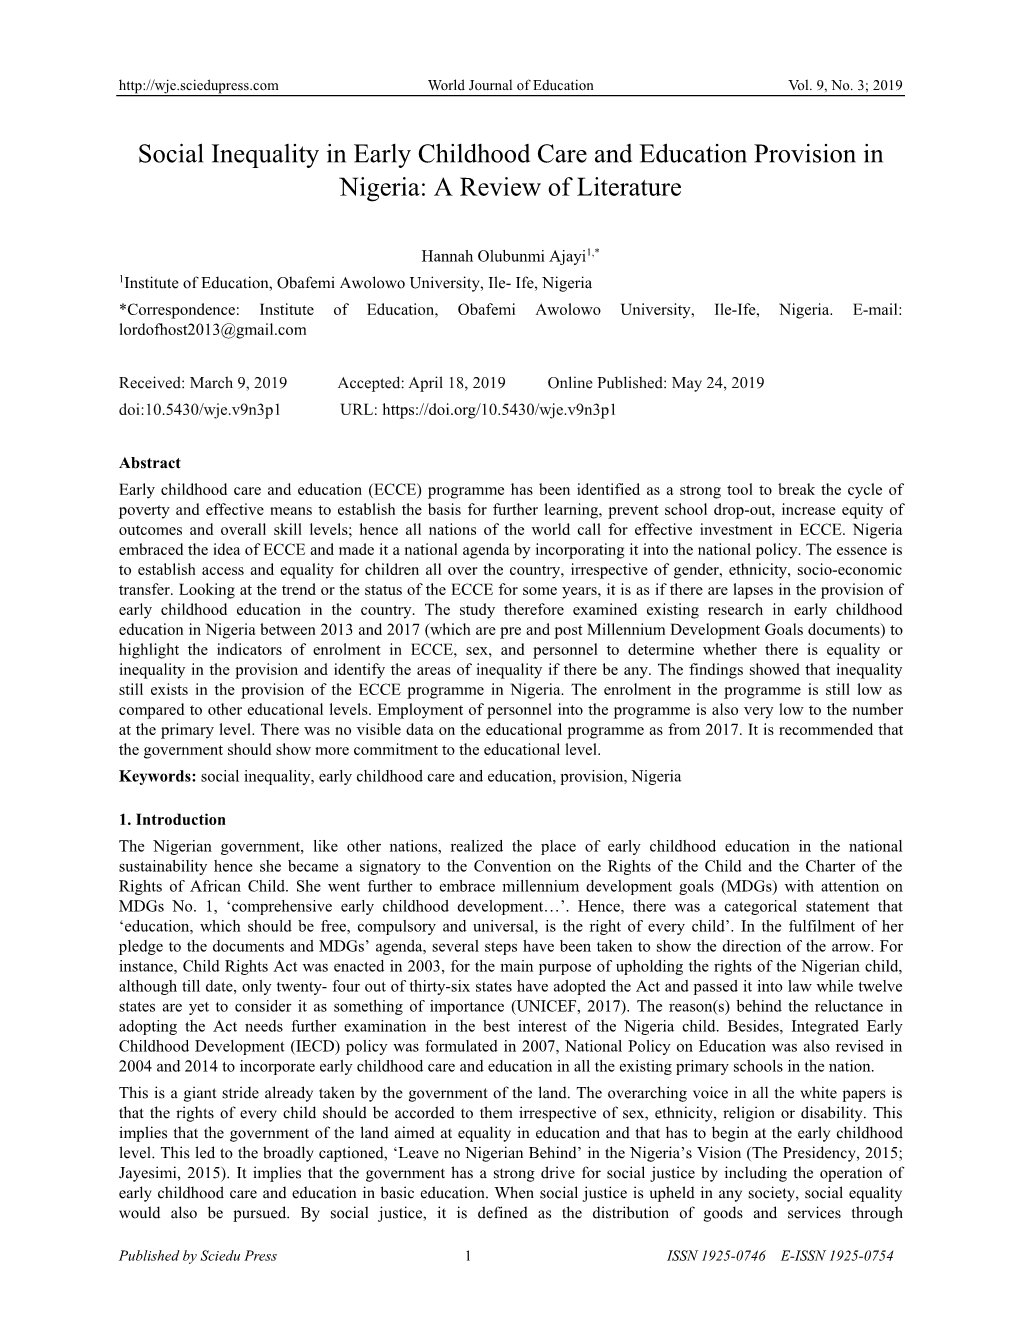 Social Inequality in Early Childhood Care and Education Provision in Nigeria: a Review of Literature